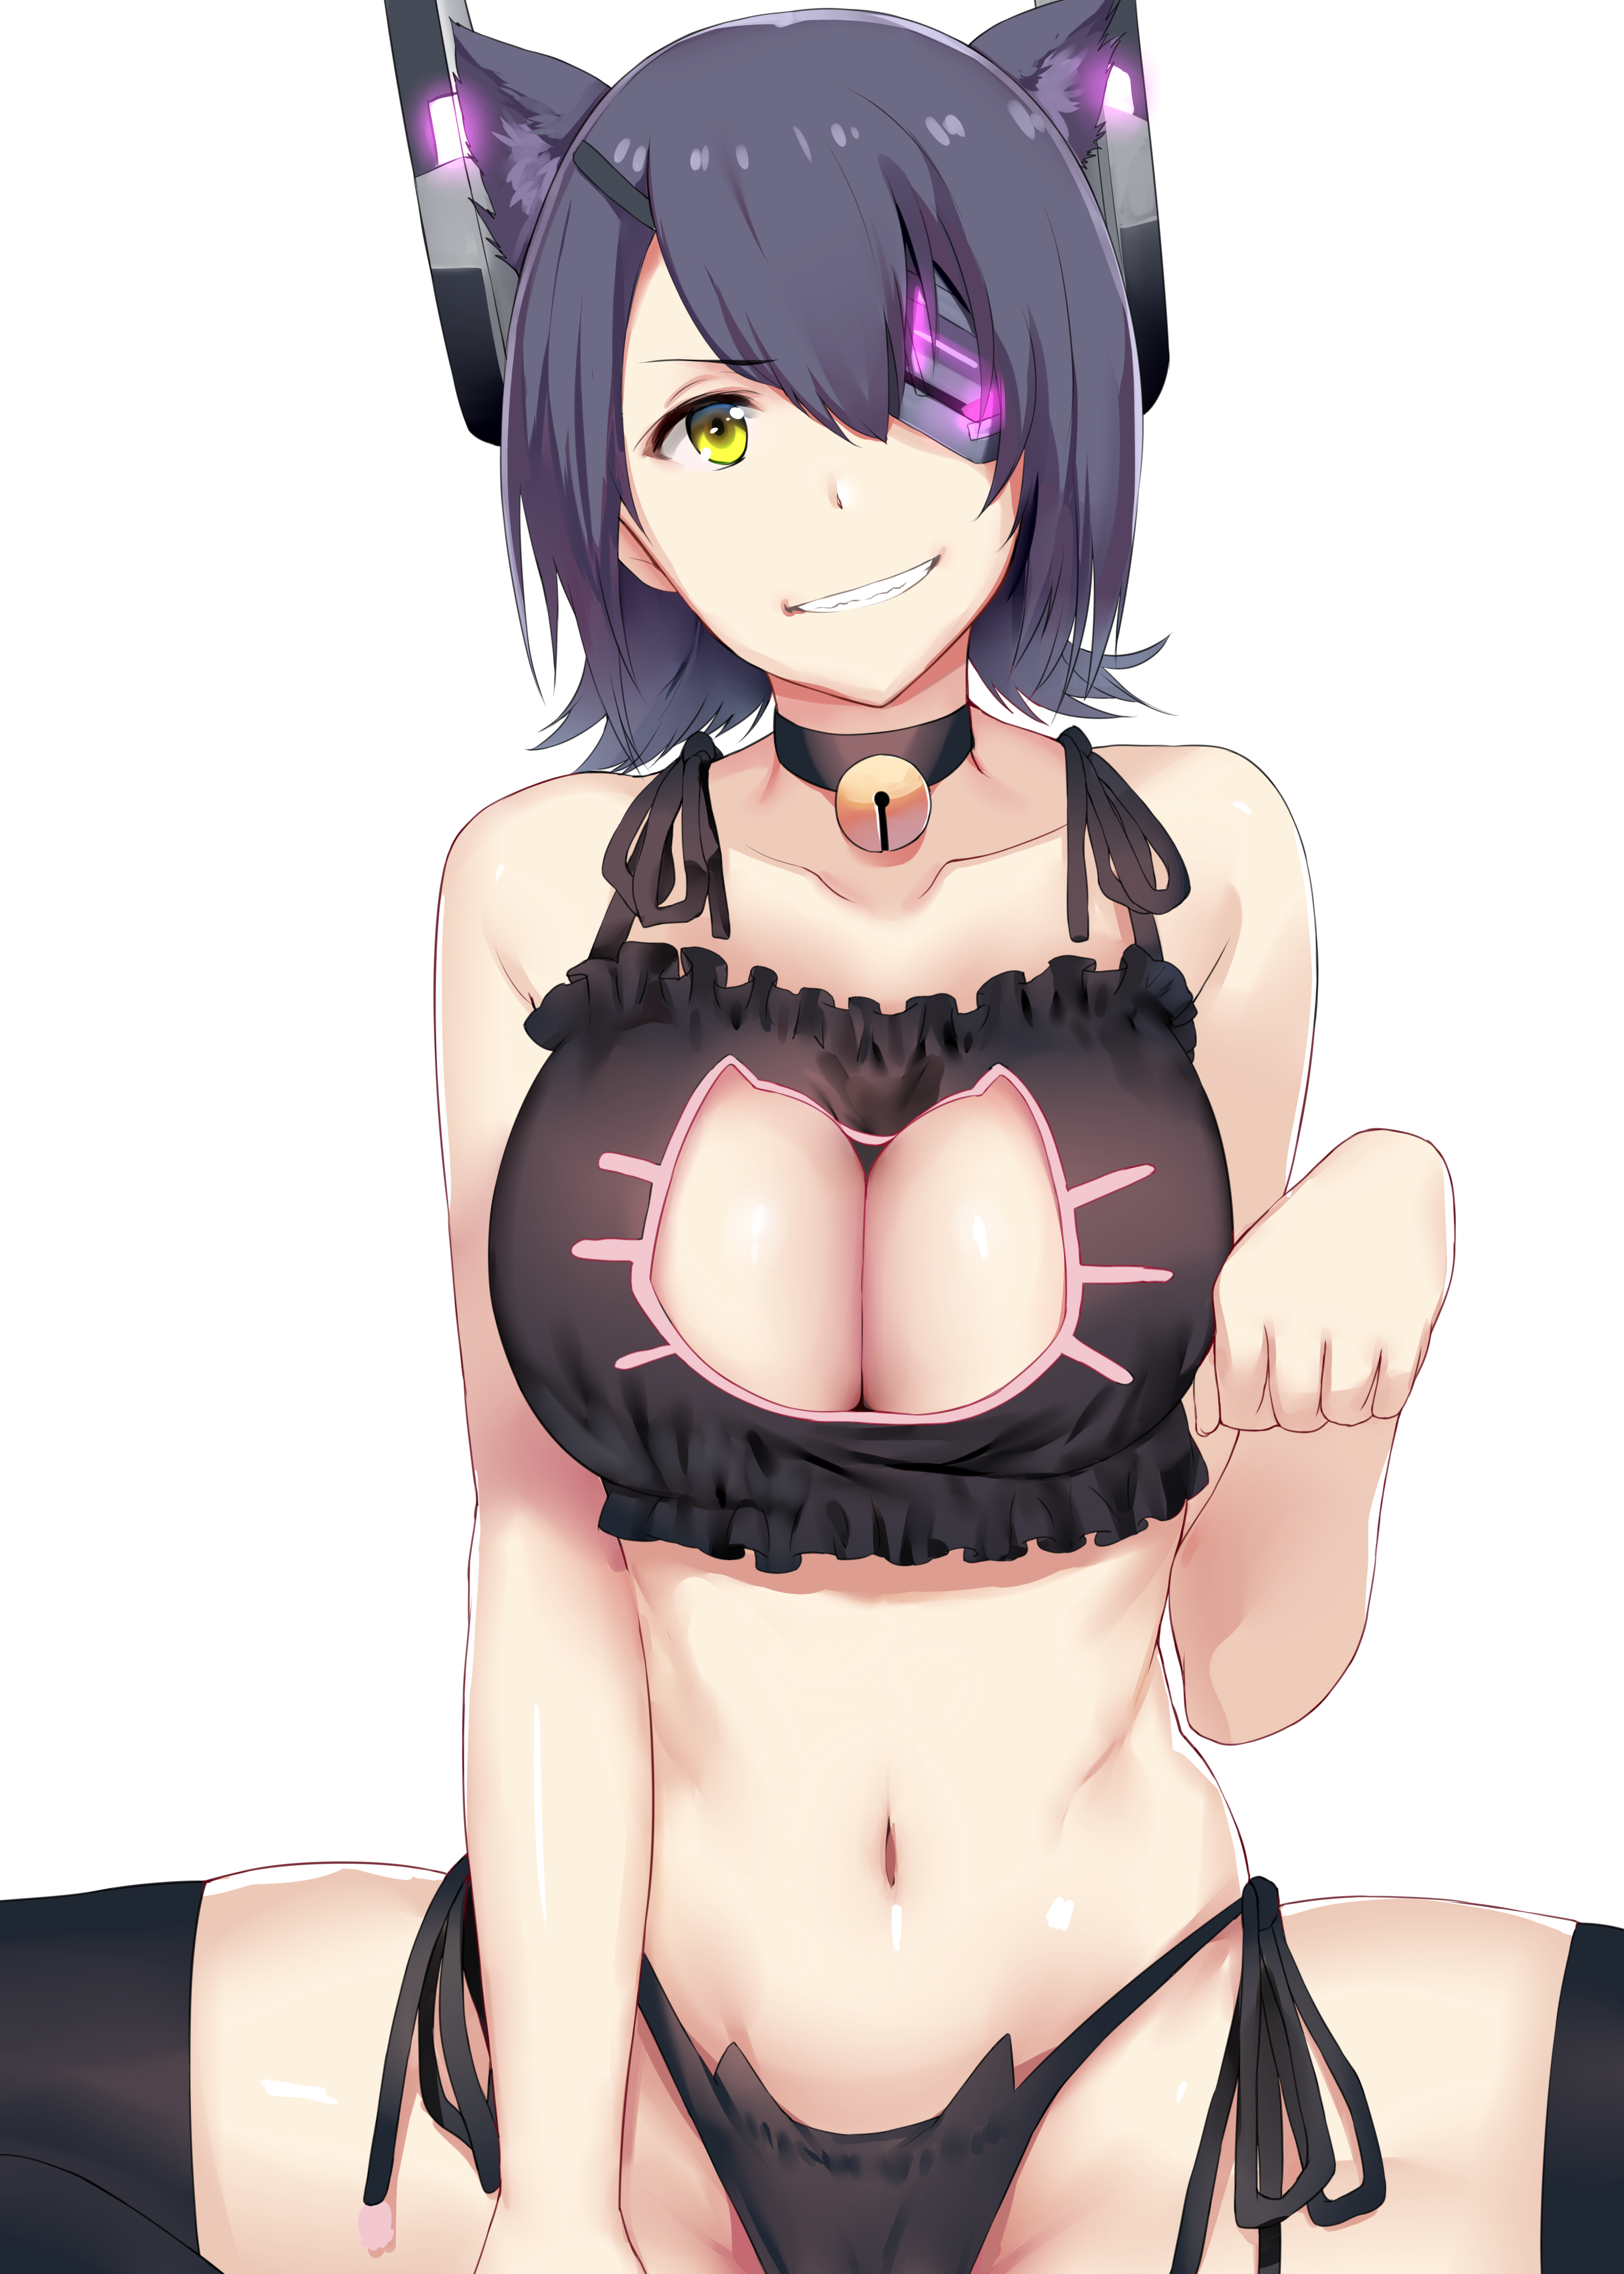 Anime 3500x4900 white background animal ears cleavage eyepatches Hews Kantai Collection lingerie cat girl panties black lingerie Tenryuu (KanColle) thigh-highs bells cat keyhole bra spread legs big boobs anime girls collar